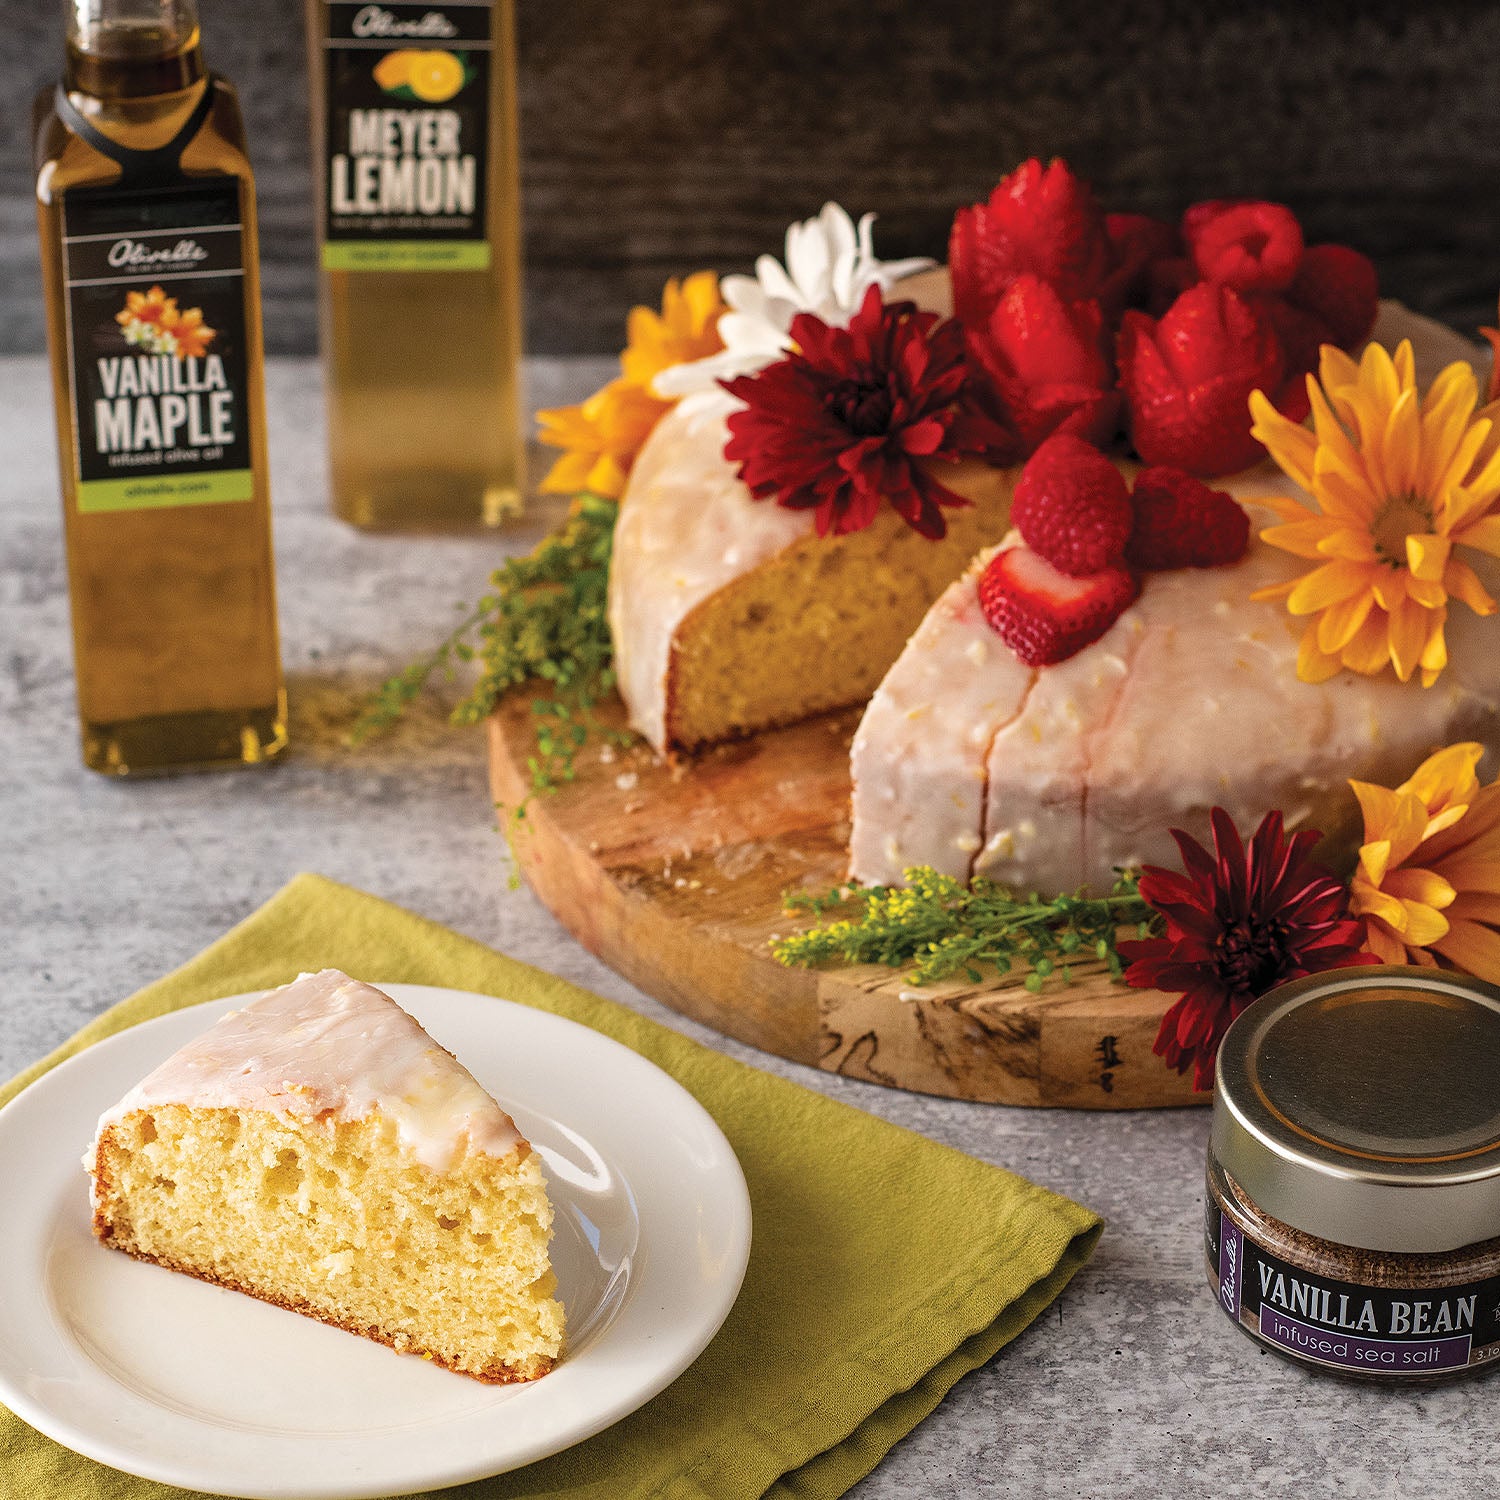 Classic Olive Oil Cake with Lemon Icing - Recipe Gift Kit